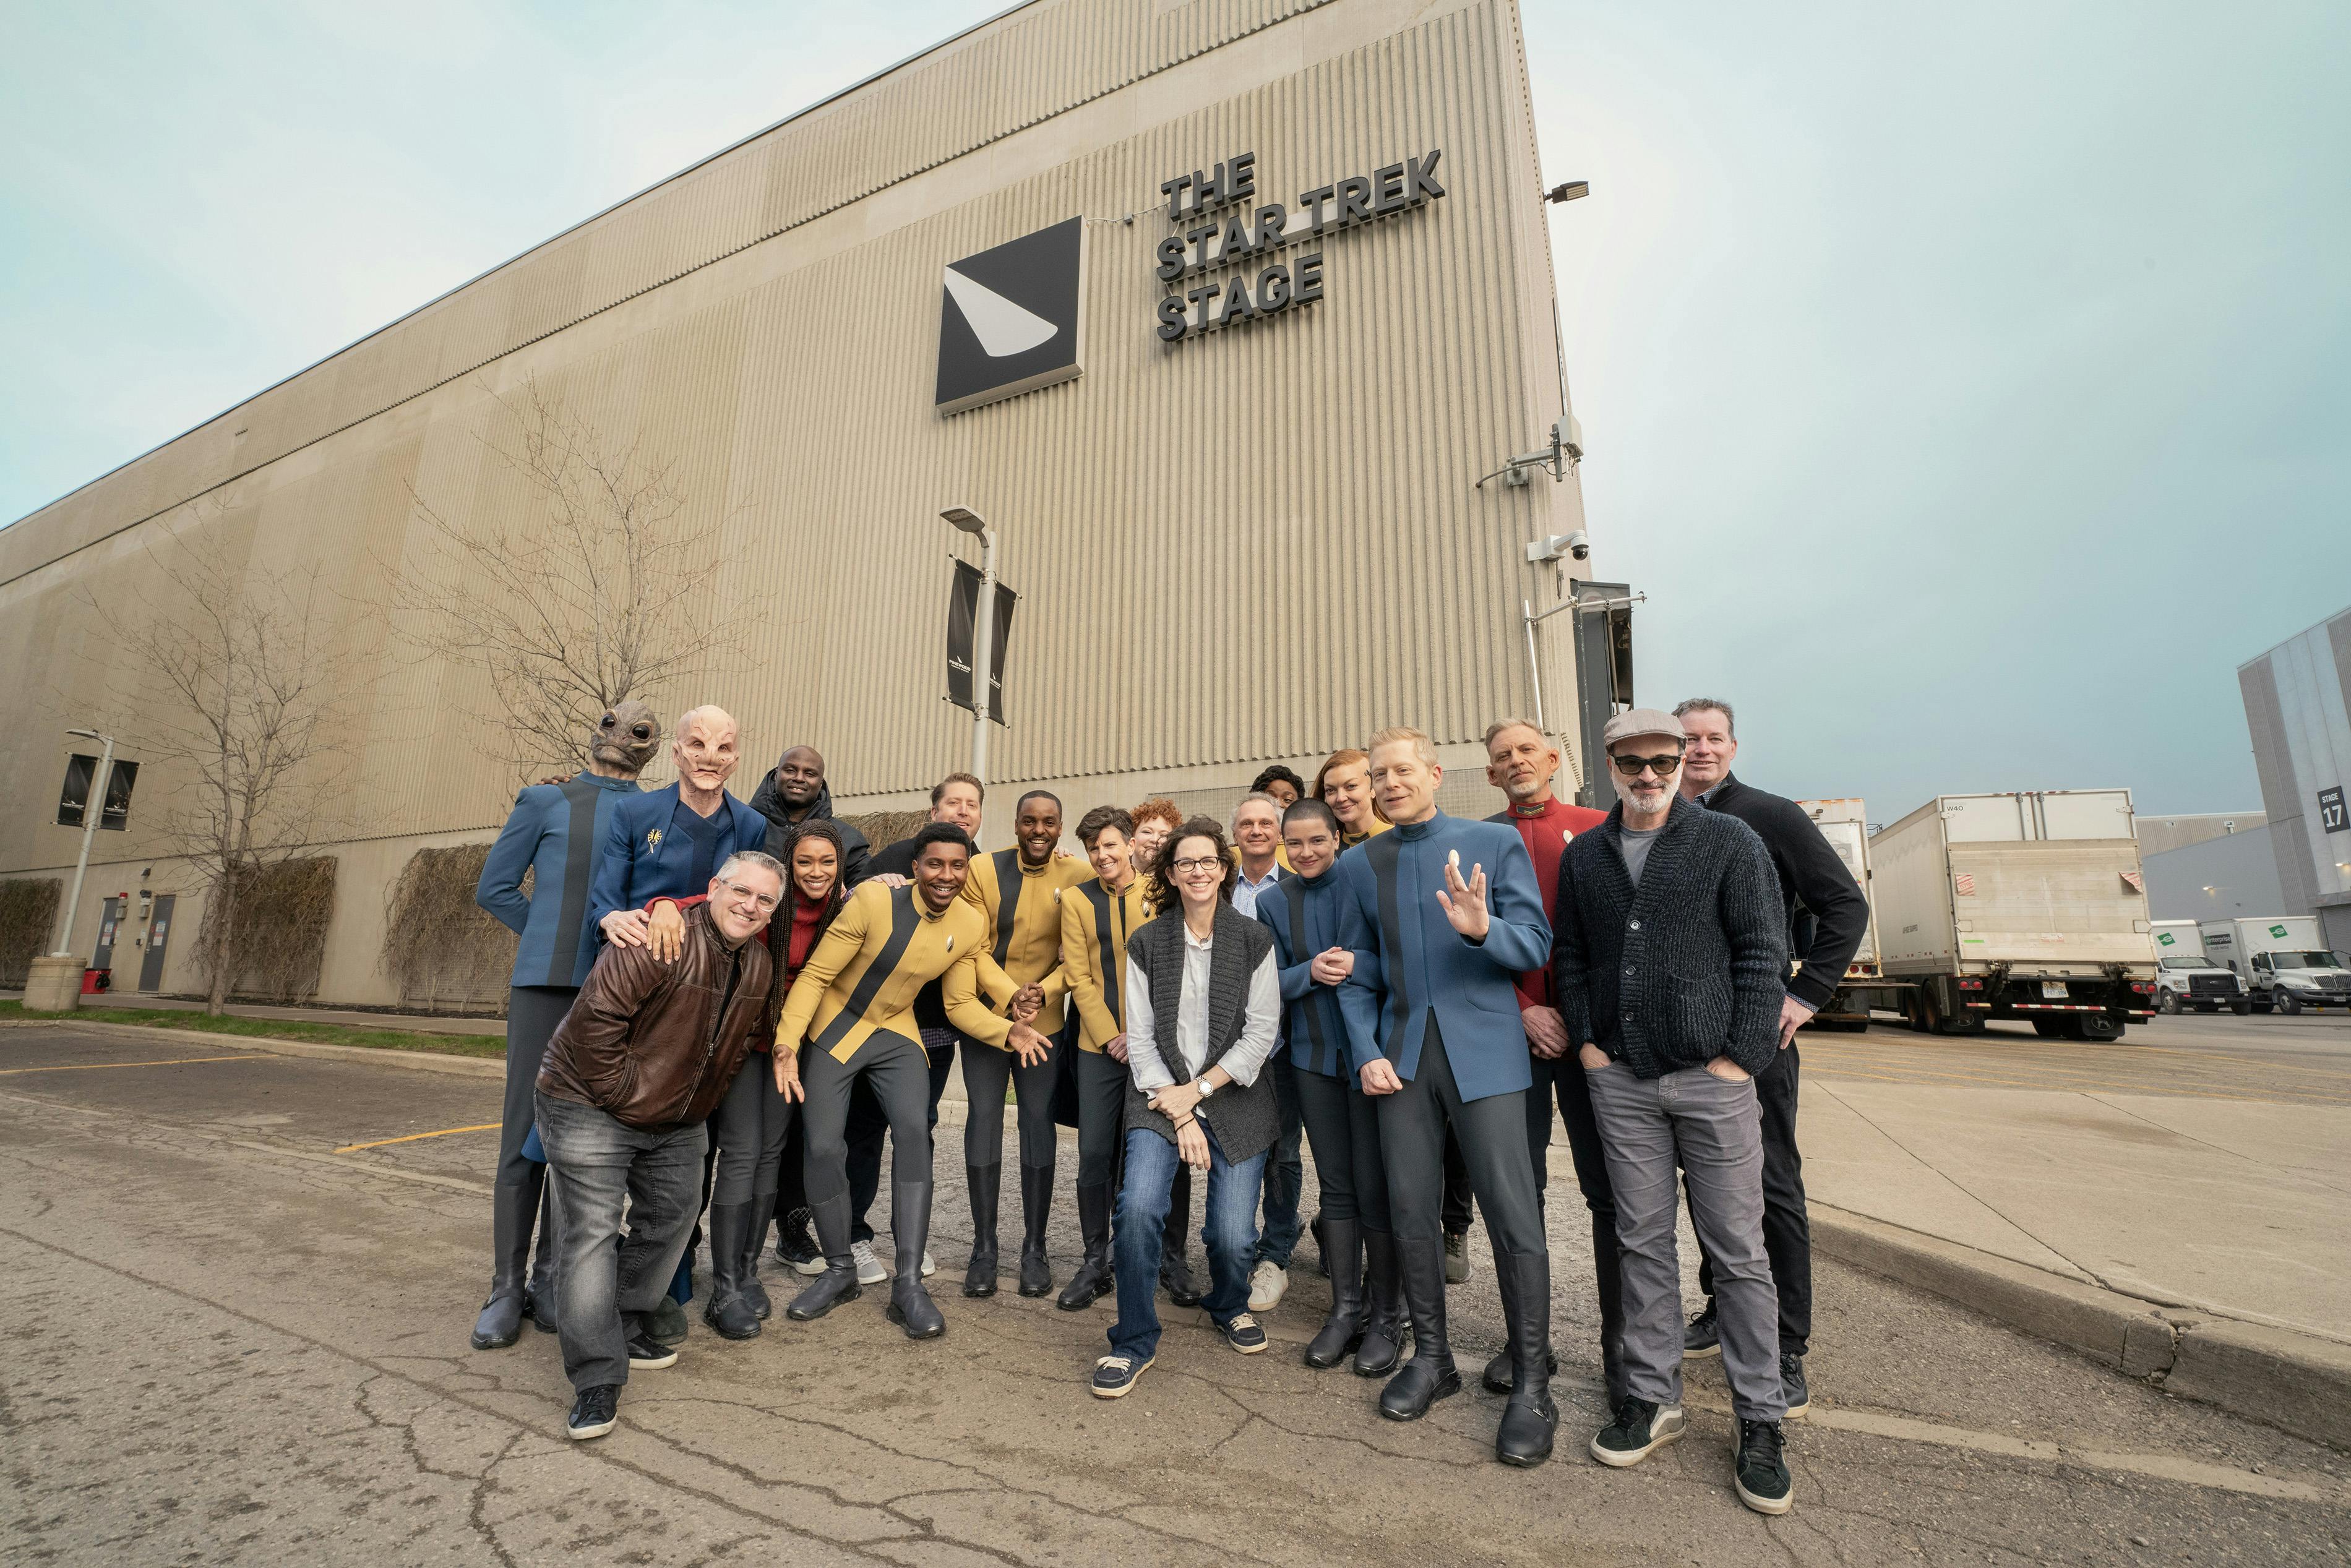 Cast and crew of Star Trek: Discovery in costume including Alex Kurtzman and Michelle Paradise stand in front of the newly renamed Star Trek stage in Pinewood Toronto